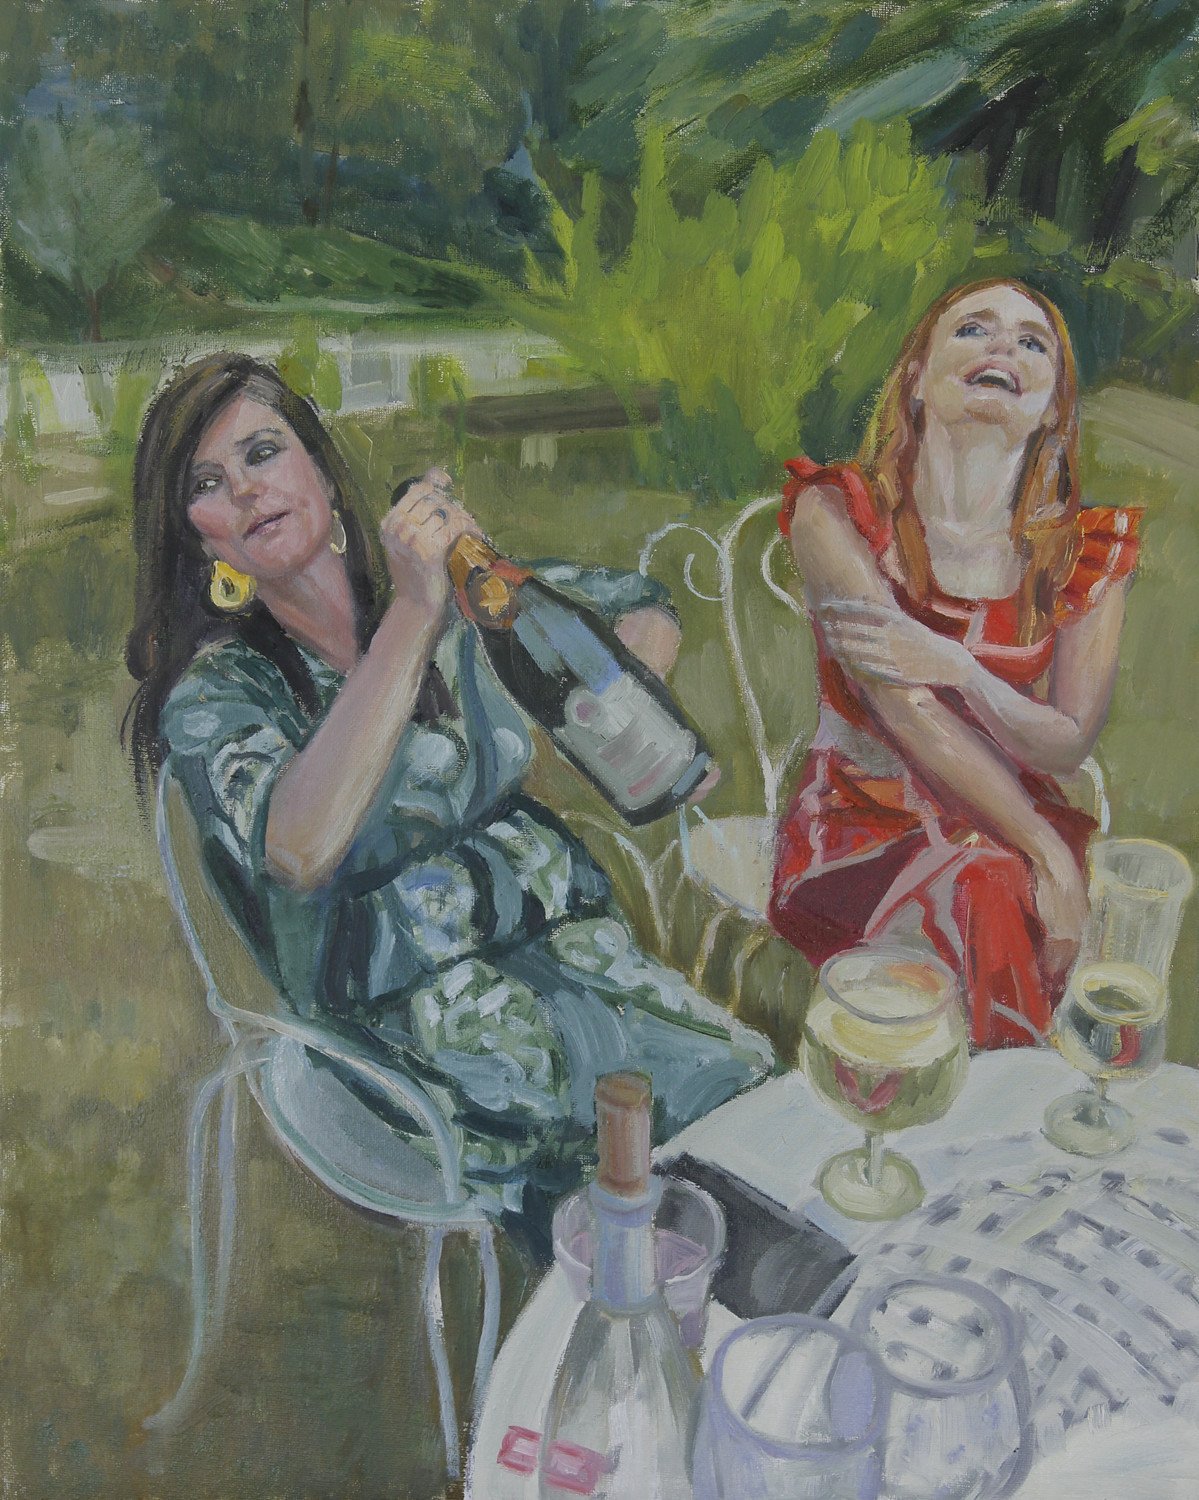 Sally and Michelle at the Chateau, 2023, Oil on board, 20x16 inches.